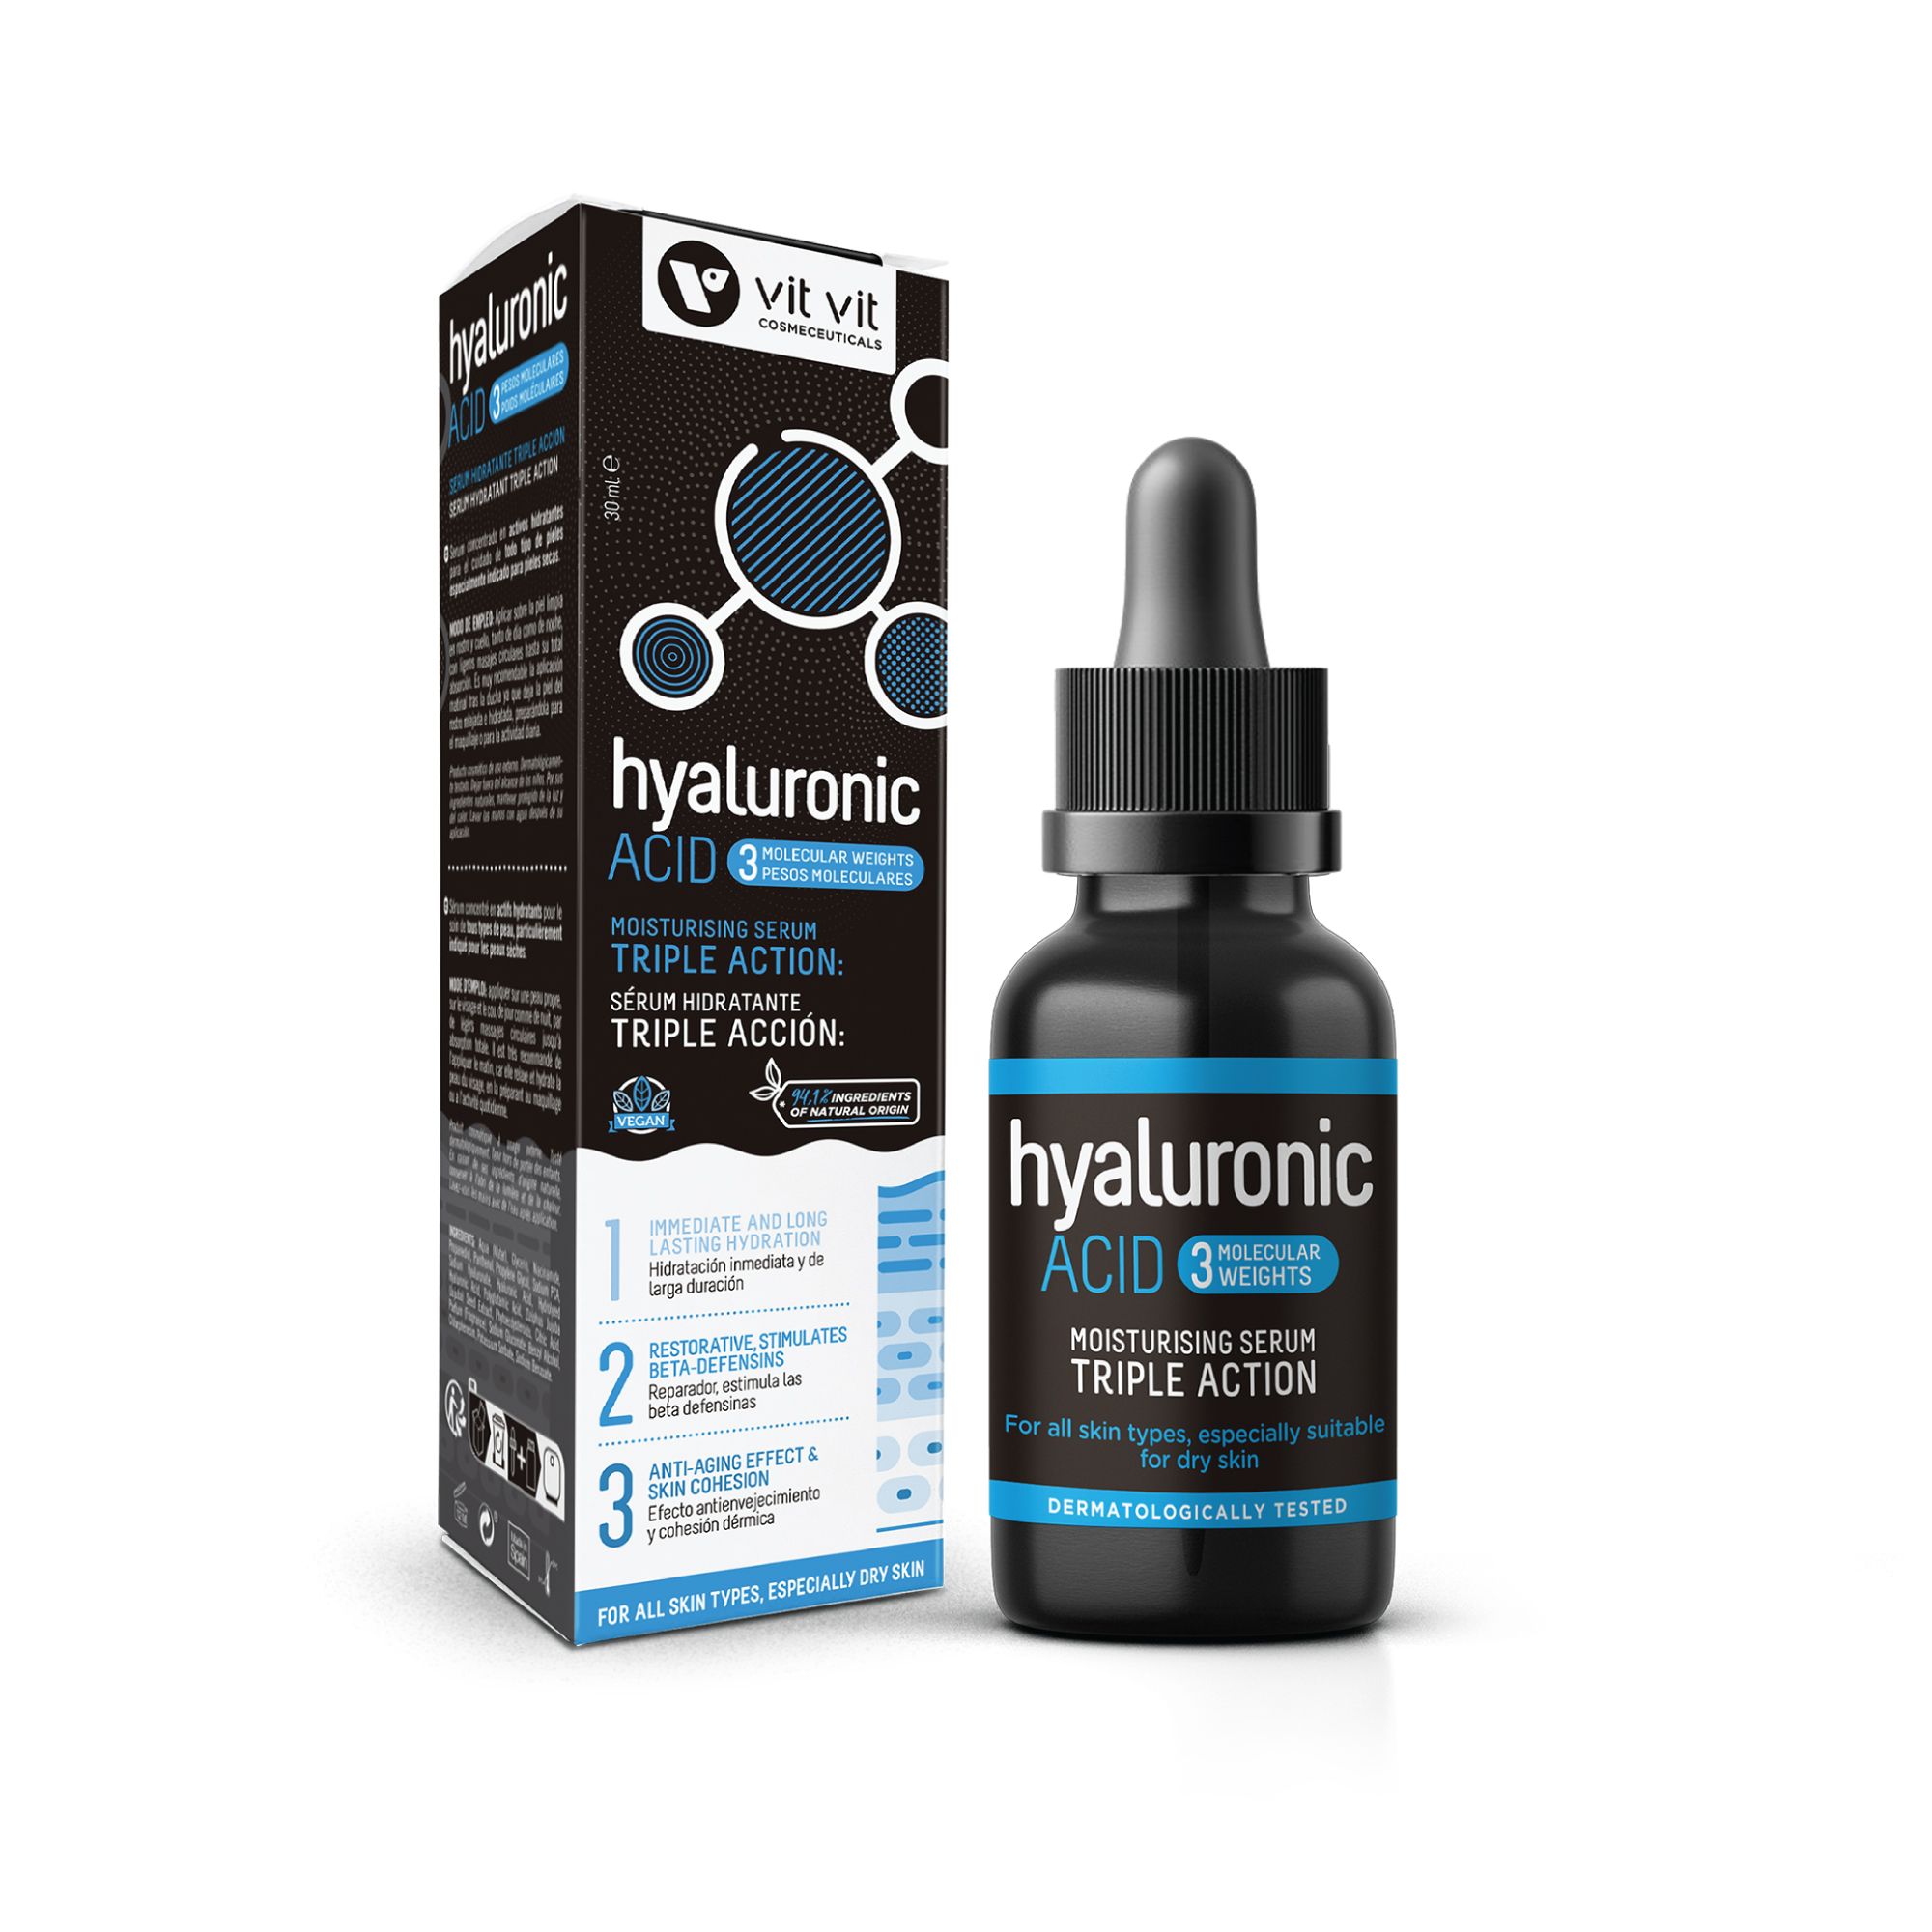 Hyaluronic Acid Serum 30ML. 3 Molecular Weights, Inmediate and long lasting Hydratation, Restorative, stimulates Beta Defensins, Anti-aging effect and skin cohesion.For Dry Skin Wholesales and Private Label Available